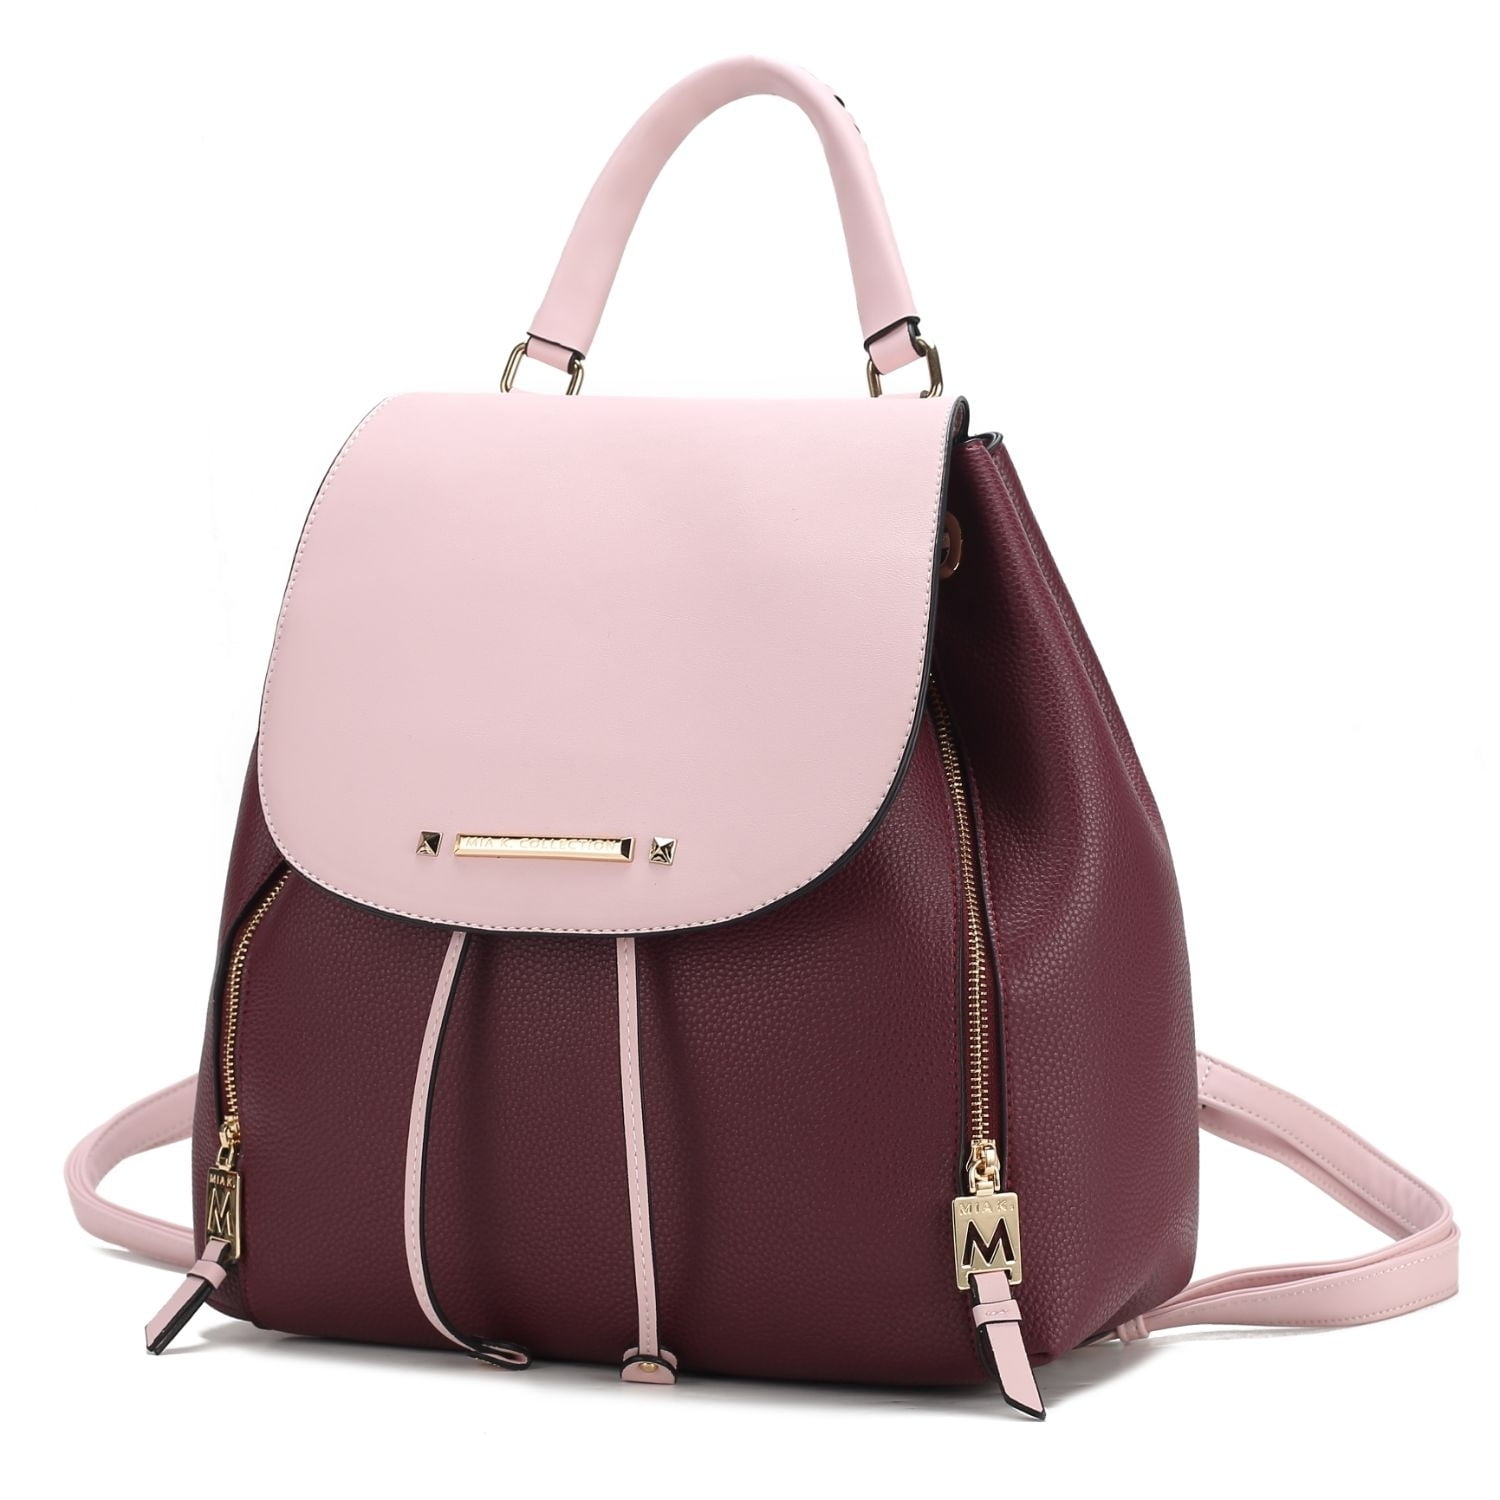 Adjustable Leather Retail Stylish Handbag For Woman And Girls at Rs 299 in  Gurugram